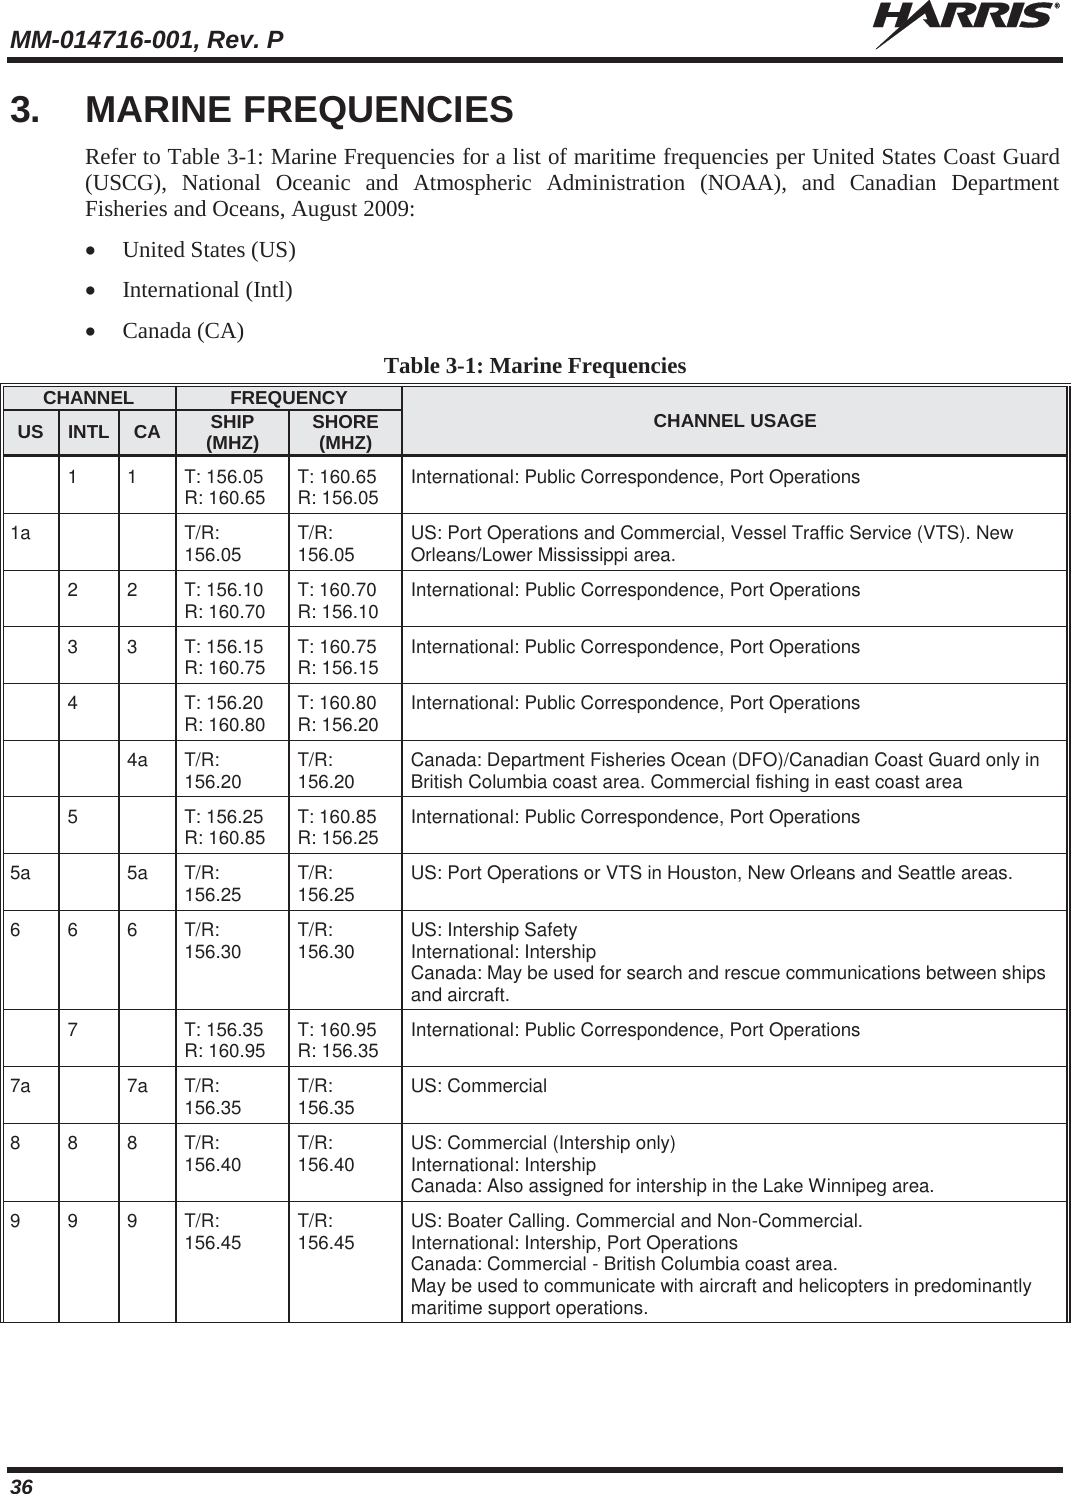 MM-014716-001, Rev. P  36 3. MARINE FREQUENCIES Refer to Table 3-1: Marine Frequencies for a list of maritime frequencies per United States Coast Guard (USCG), National Oceanic and Atmospheric Administration (NOAA), and Canadian Department Fisheries and Oceans, August 2009: x United States (US) x International (Intl) x Canada (CA) Table 3-1: Marine Frequencies CHANNEL FREQUENCY CHANNEL USAGE US INTL CA SHIP (MHZ) SHORE (MHZ)  1 1 T: 156.05 R: 160.65 T: 160.65 R: 156.05 International: Public Correspondence, Port Operations 1a   T/R: 156.05 T/R: 156.05 US: Port Operations and Commercial, Vessel Traffic Service (VTS). New Orleans/Lower Mississippi area.   2 2 T: 156.10 R: 160.70 T: 160.70  R: 156.10 International: Public Correspondence, Port Operations  3 3 T: 156.15 R: 160.75 T: 160.75 R: 156.15 International: Public Correspondence, Port Operations  4  T: 156.20  R: 160.80 T: 160.80  R: 156.20 International: Public Correspondence, Port Operations   4a T/R: 156.20 T/R: 156.20 Canada: Department Fisheries Ocean (DFO)/Canadian Coast Guard only in British Columbia coast area. Commercial fishing in east coast area  5  T: 156.25  R: 160.85 T: 160.85  R: 156.25 International: Public Correspondence, Port Operations 5a  5a T/R: 156.25 T/R: 156.25 US: Port Operations or VTS in Houston, New Orleans and Seattle areas. 6 6 6 T/R: 156.30 T/R: 156.30 US: Intership Safety International: Intership Canada: May be used for search and rescue communications between ships and aircraft.  7  T: 156.35  R: 160.95 T: 160.95  R: 156.35 International: Public Correspondence, Port Operations 7a  7a T/R: 156.35 T/R: 156.35 US: Commercial 8 8 8 T/R: 156.40 T/R: 156.40 US: Commercial (Intership only) International: Intership Canada: Also assigned for intership in the Lake Winnipeg area. 9 9 9 T/R: 156.45 T/R: 156.45 US: Boater Calling. Commercial and Non-Commercial. International: Intership, Port Operations Canada: Commercial - British Columbia coast area. May be used to communicate with aircraft and helicopters in predominantly maritime support operations. 